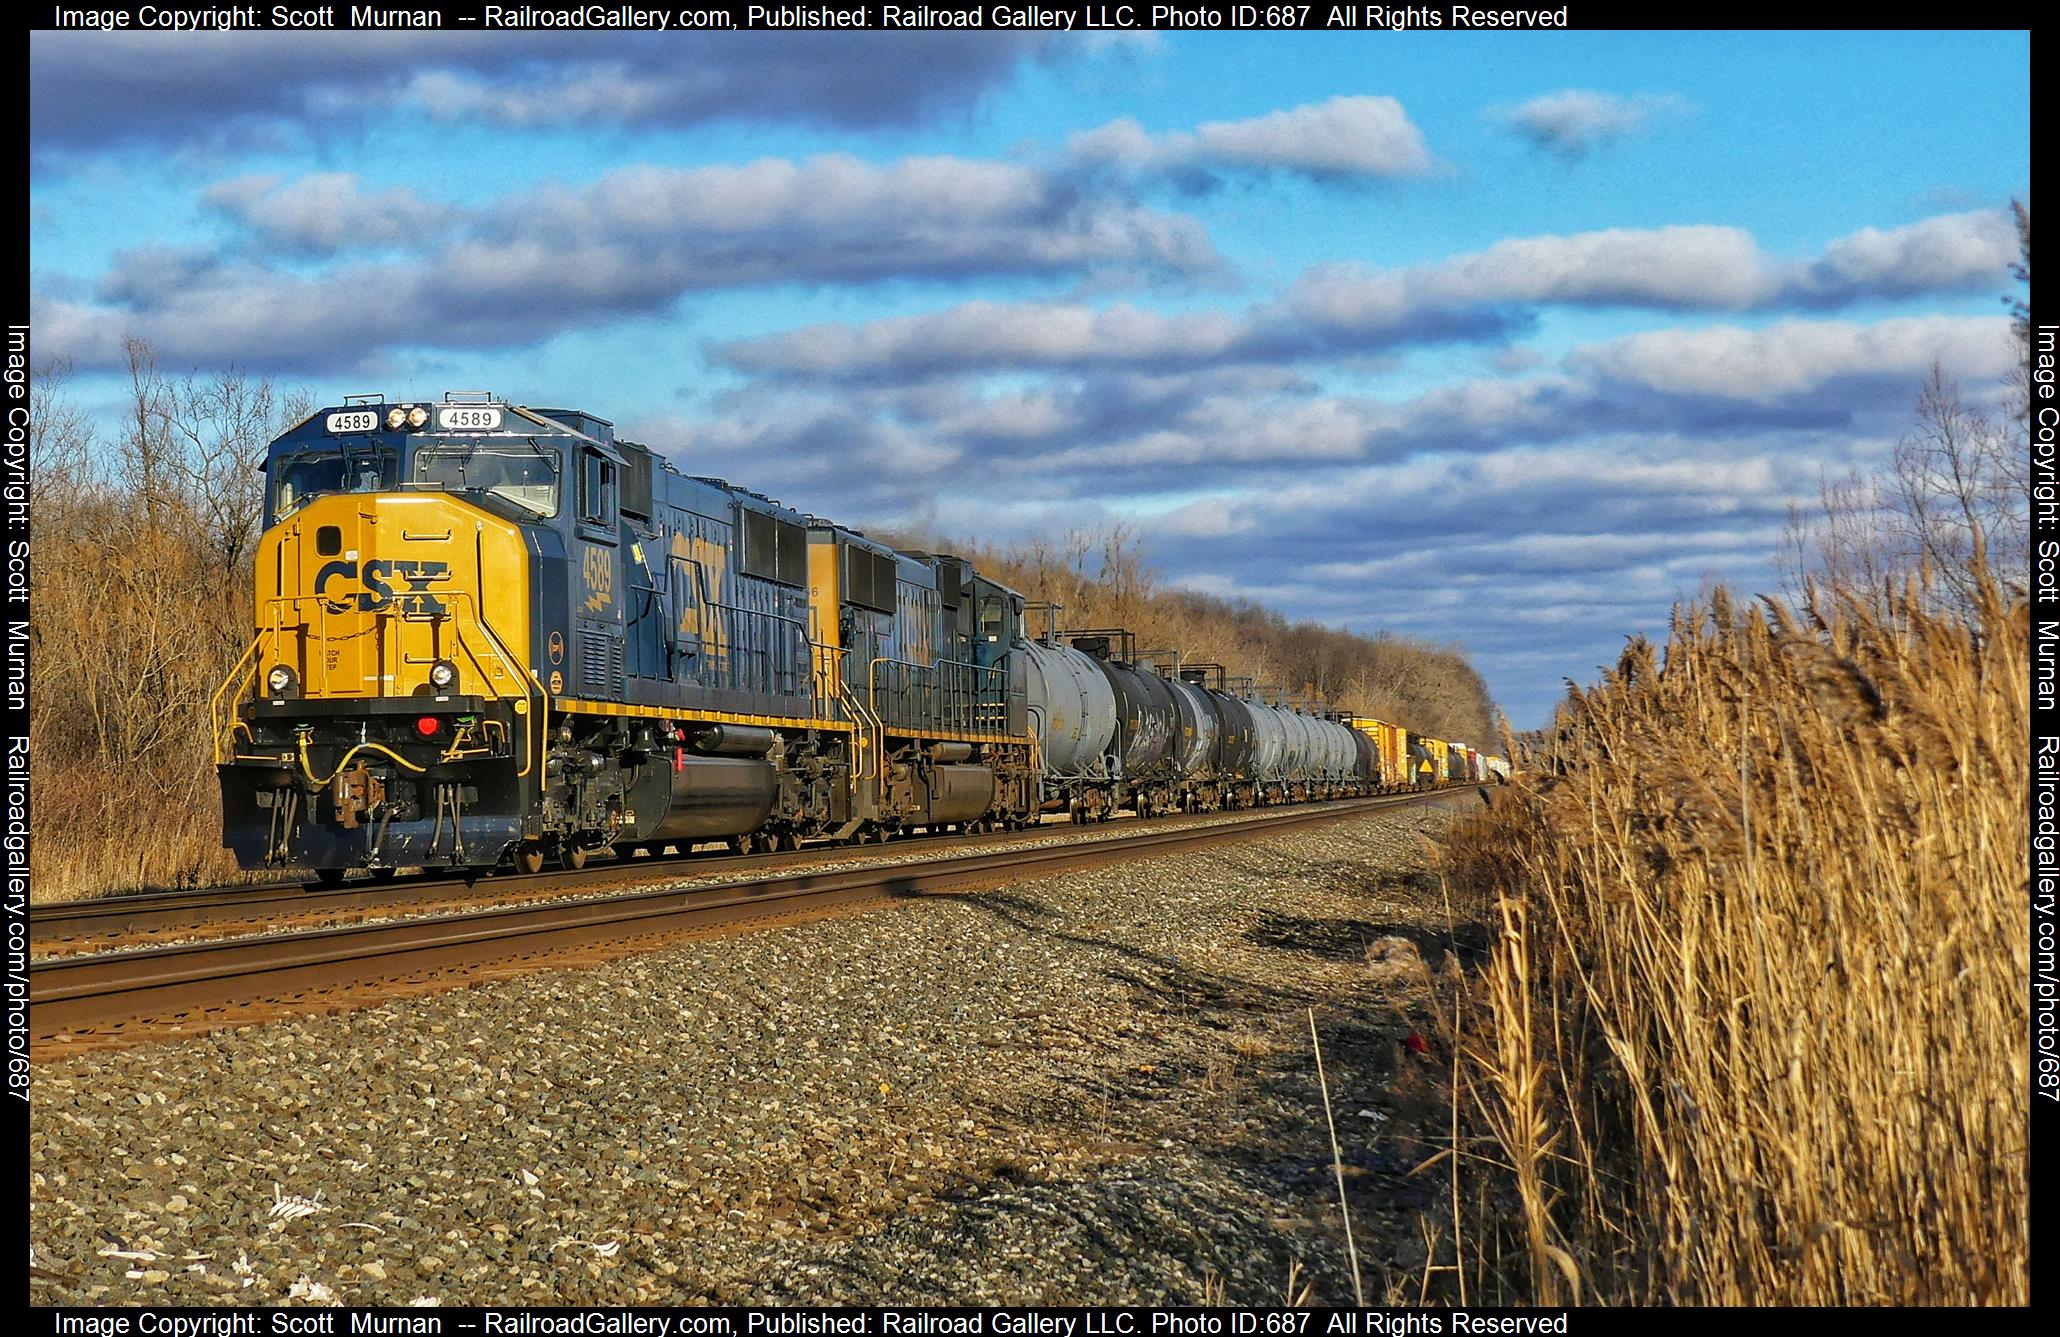 CSX 4589 is a class EMD SD70MAC and  is pictured in Wayneport , New York, United States.  This was taken along the Rochester Subdivision  on the CSX Transportation. Photo Copyright: Scott  Murnan  uploaded to Railroad Gallery on 02/11/2023. This photograph of CSX 4589 was taken on Saturday, February 11, 2023. All Rights Reserved. 